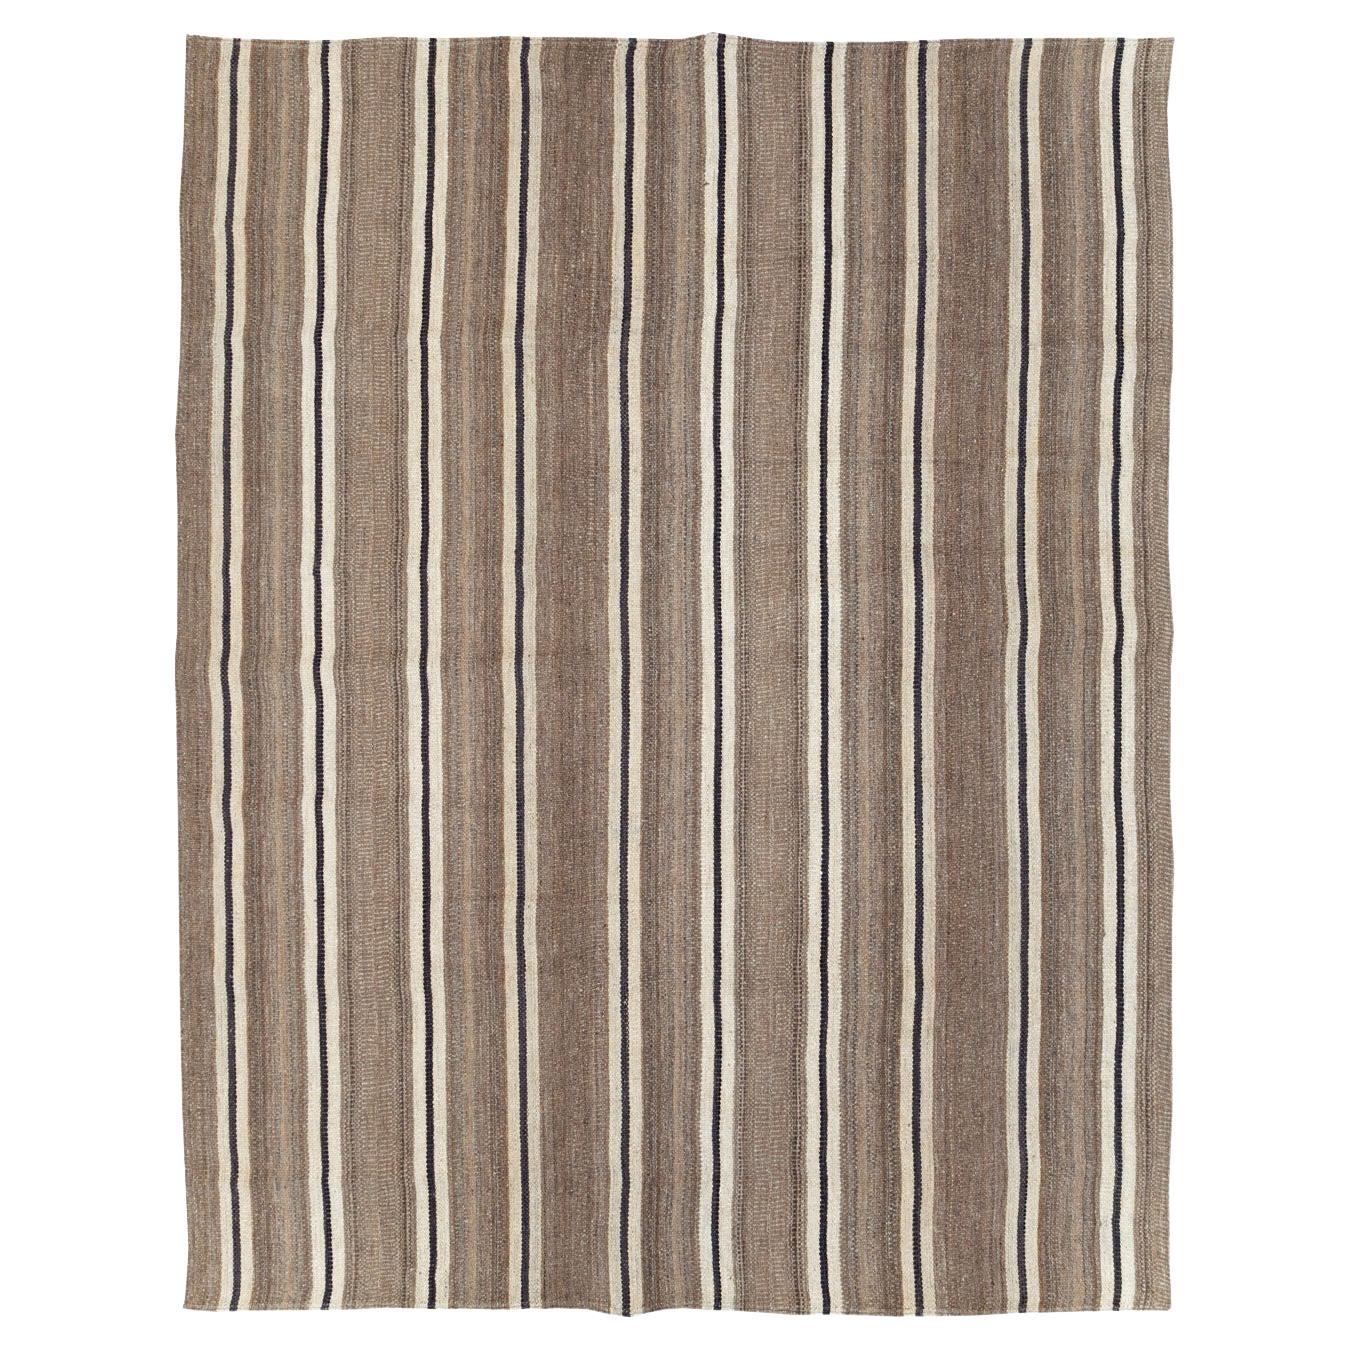 Modern Turkish Flatweave Kilim Small Room Size Carpet in Cream, Black, and Brown For Sale